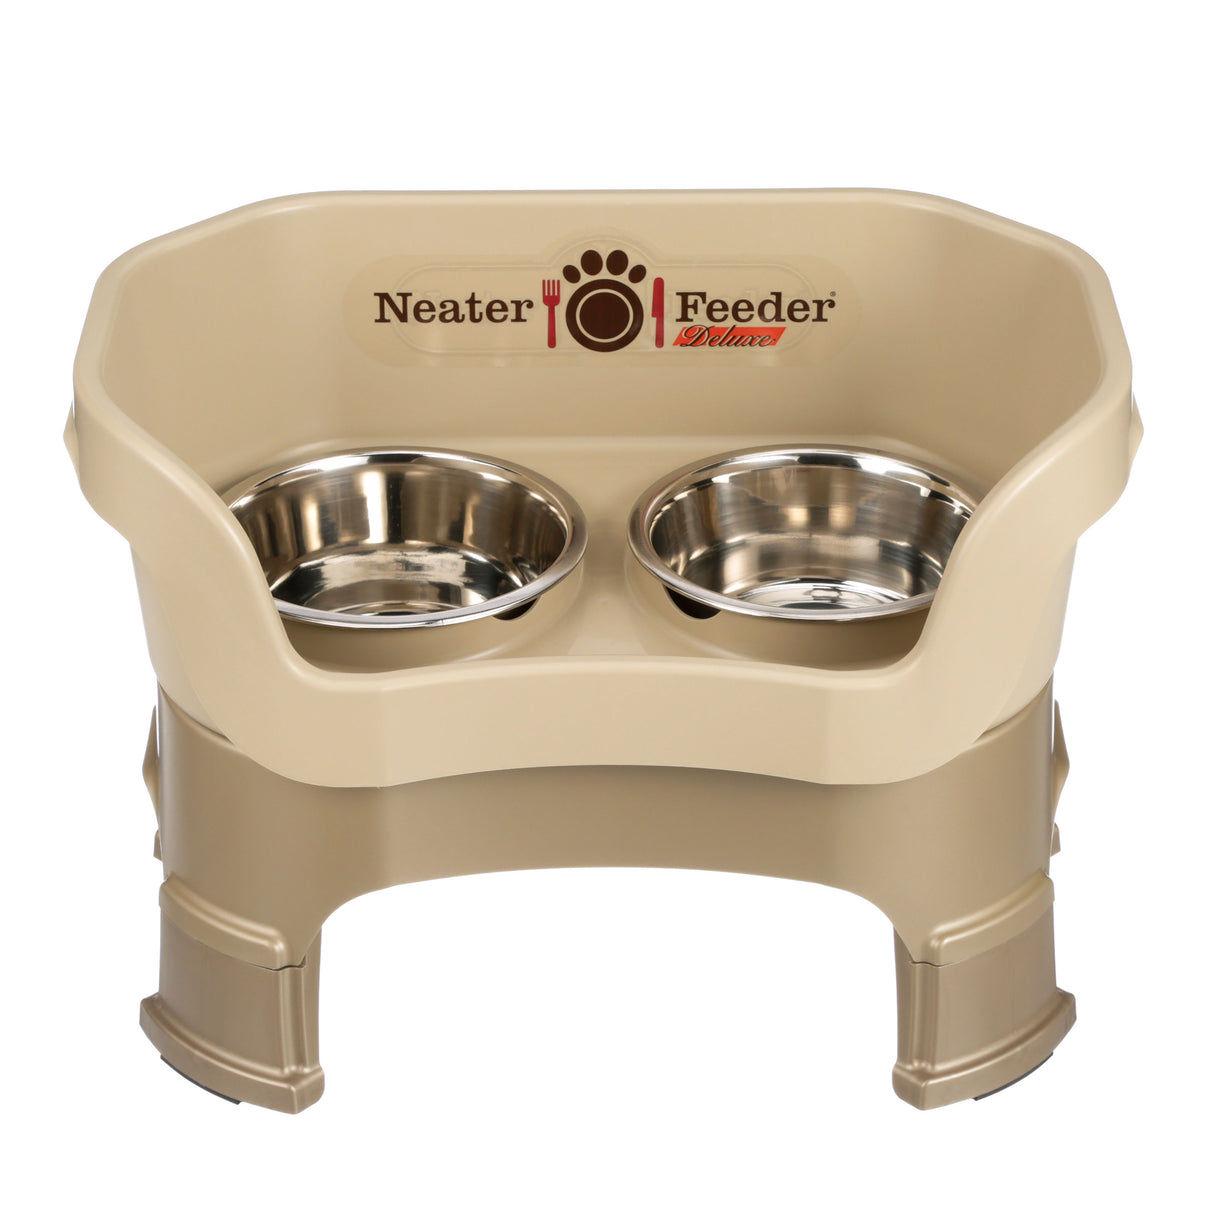 Deluxe Medium Neater Feeder with leg extensions in Cappuccino